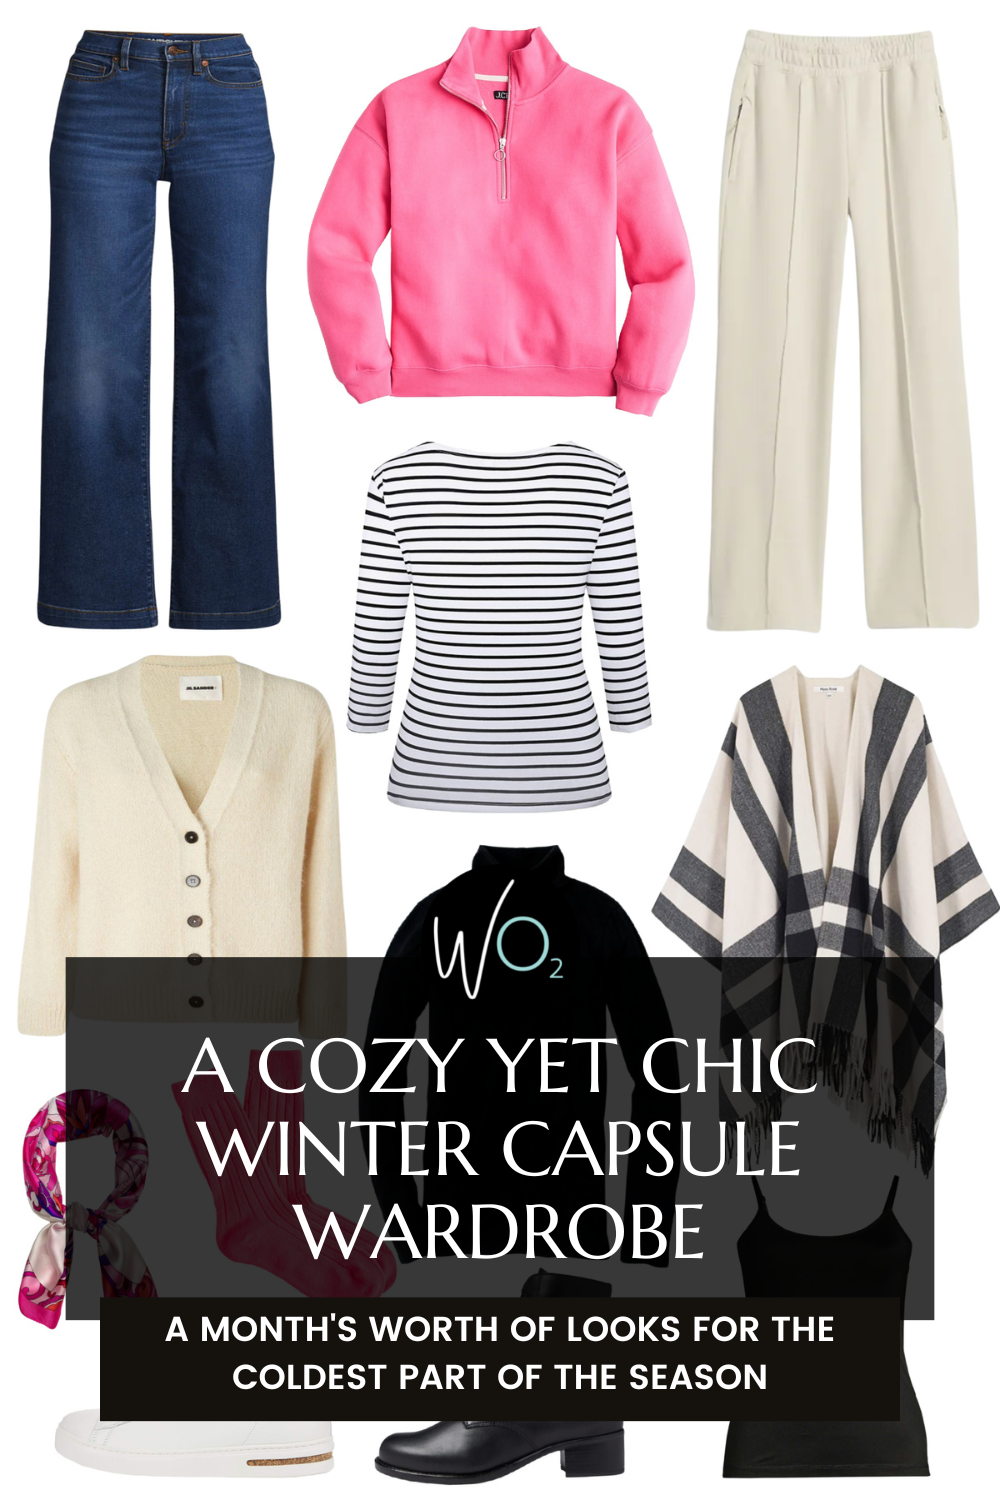 13 Winter Travel Capsule Wardrobe Pieces From $30